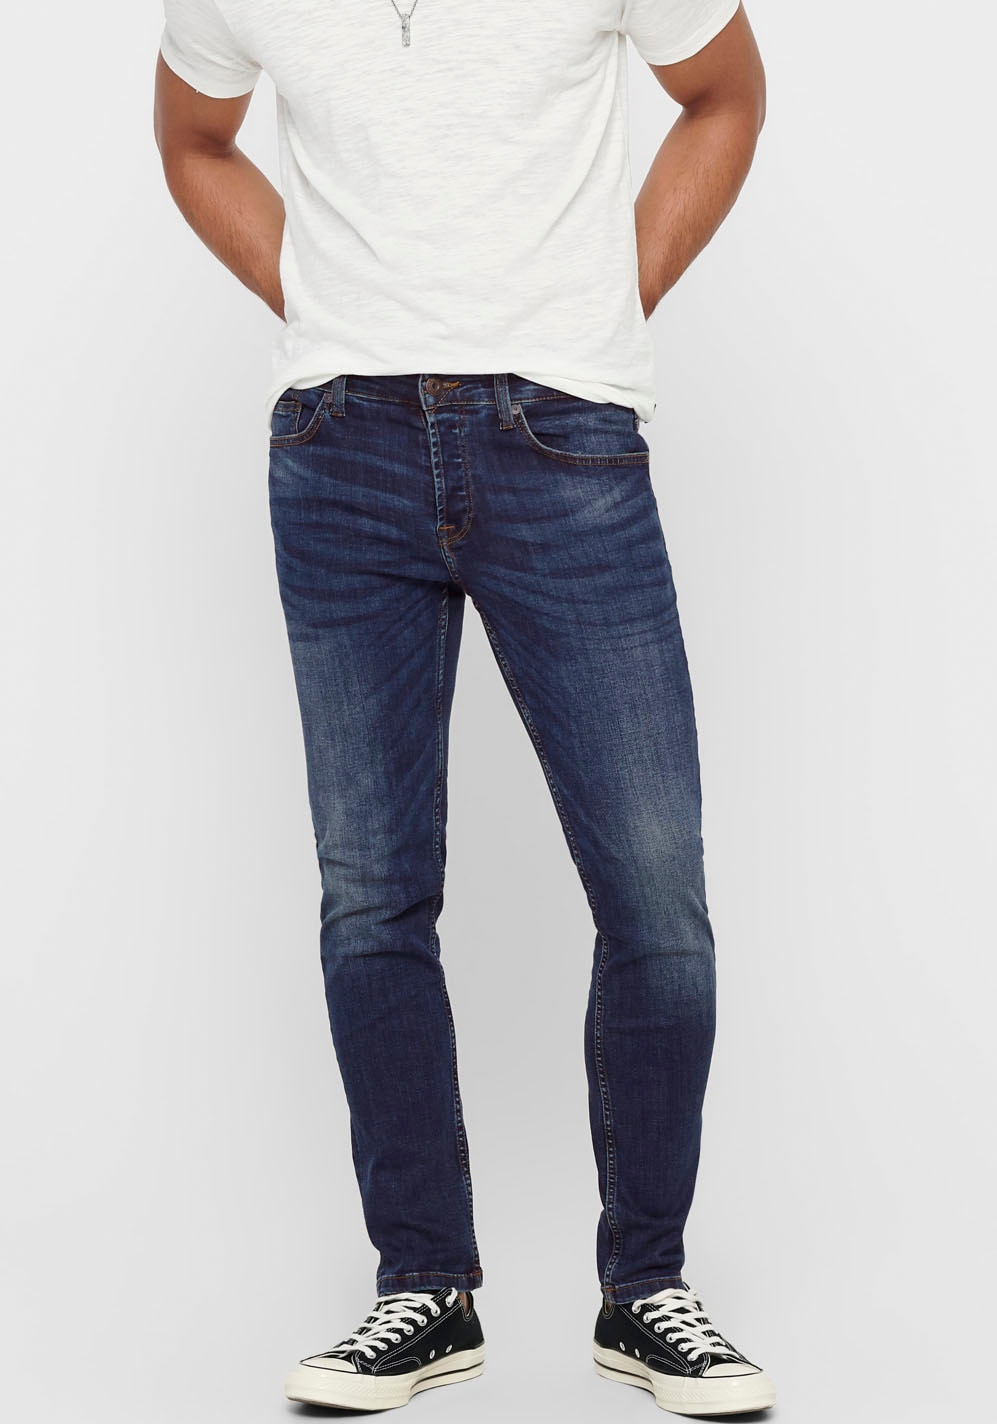 ONLY & SONS Slim-fit-Jeans »ONSWEFT REG. D. GREY 6458 JEANS VD«